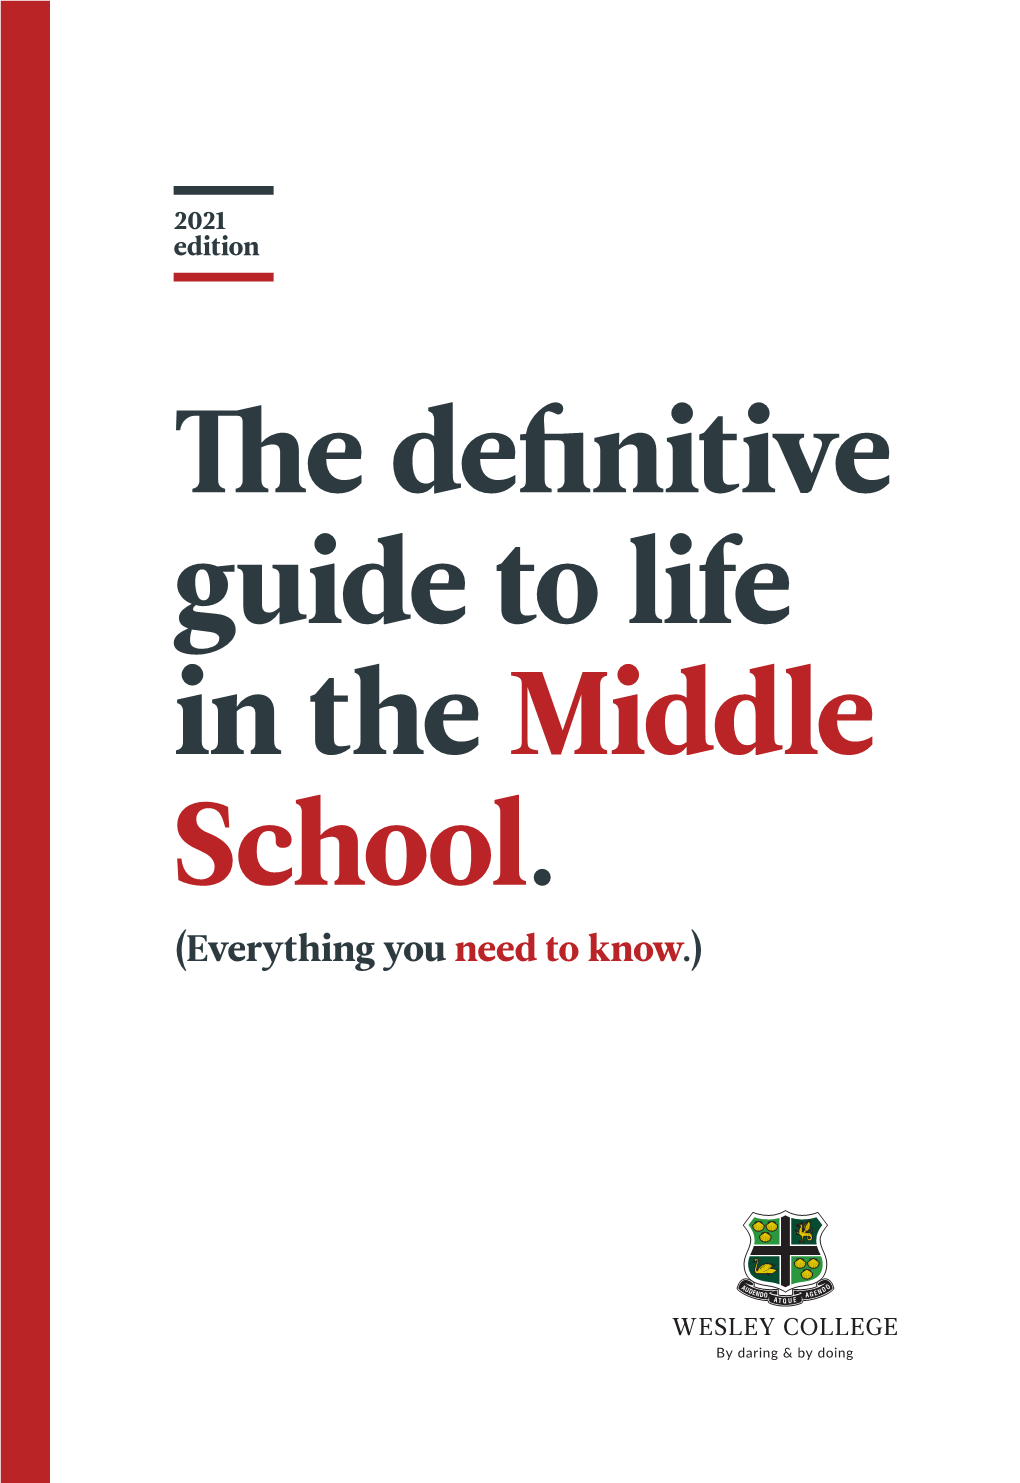 The Definitive Guide to Life in the Middle School. (Everything You Need to Know.) the HANDBOOK WESLEY COLLEGE MIDDLE SCHOOL